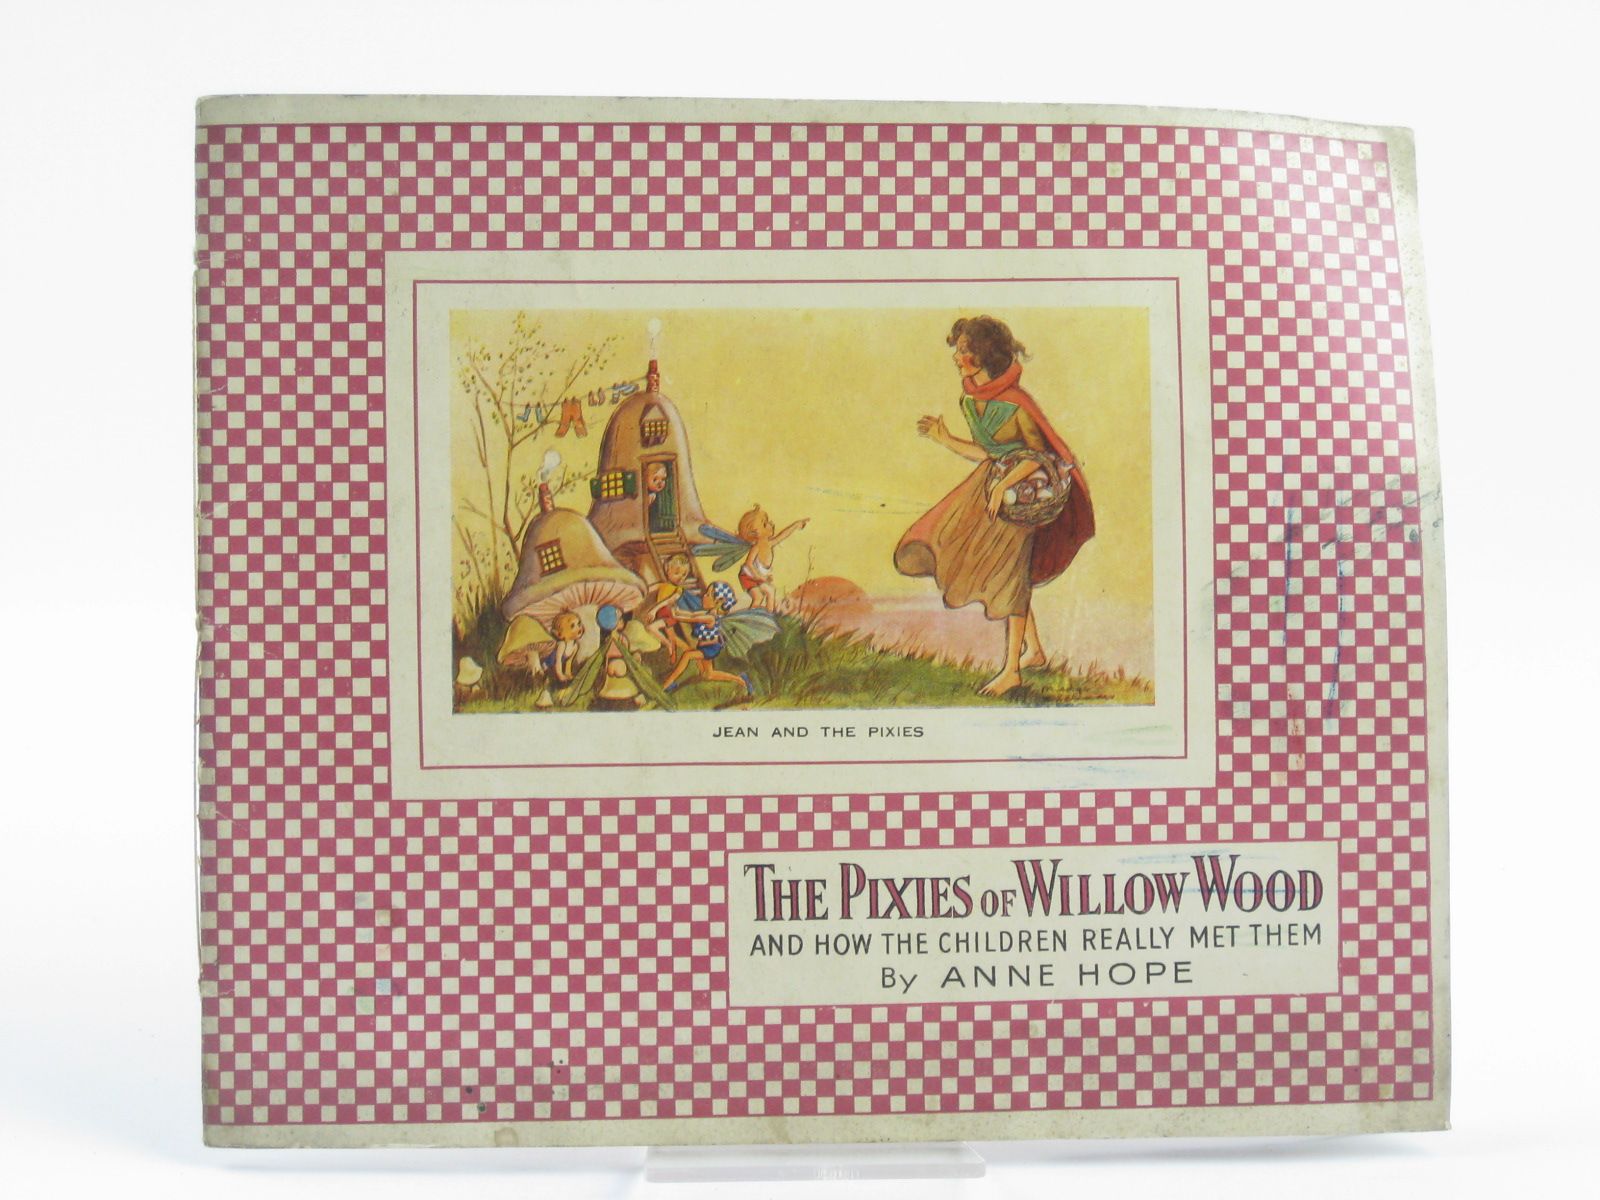 Photo of THE PIXIES OF WILLOW WOOD written by Hope, Anne illustrated by Williams, Madge published by J. Salmon (STOCK CODE: 1310278)  for sale by Stella & Rose's Books